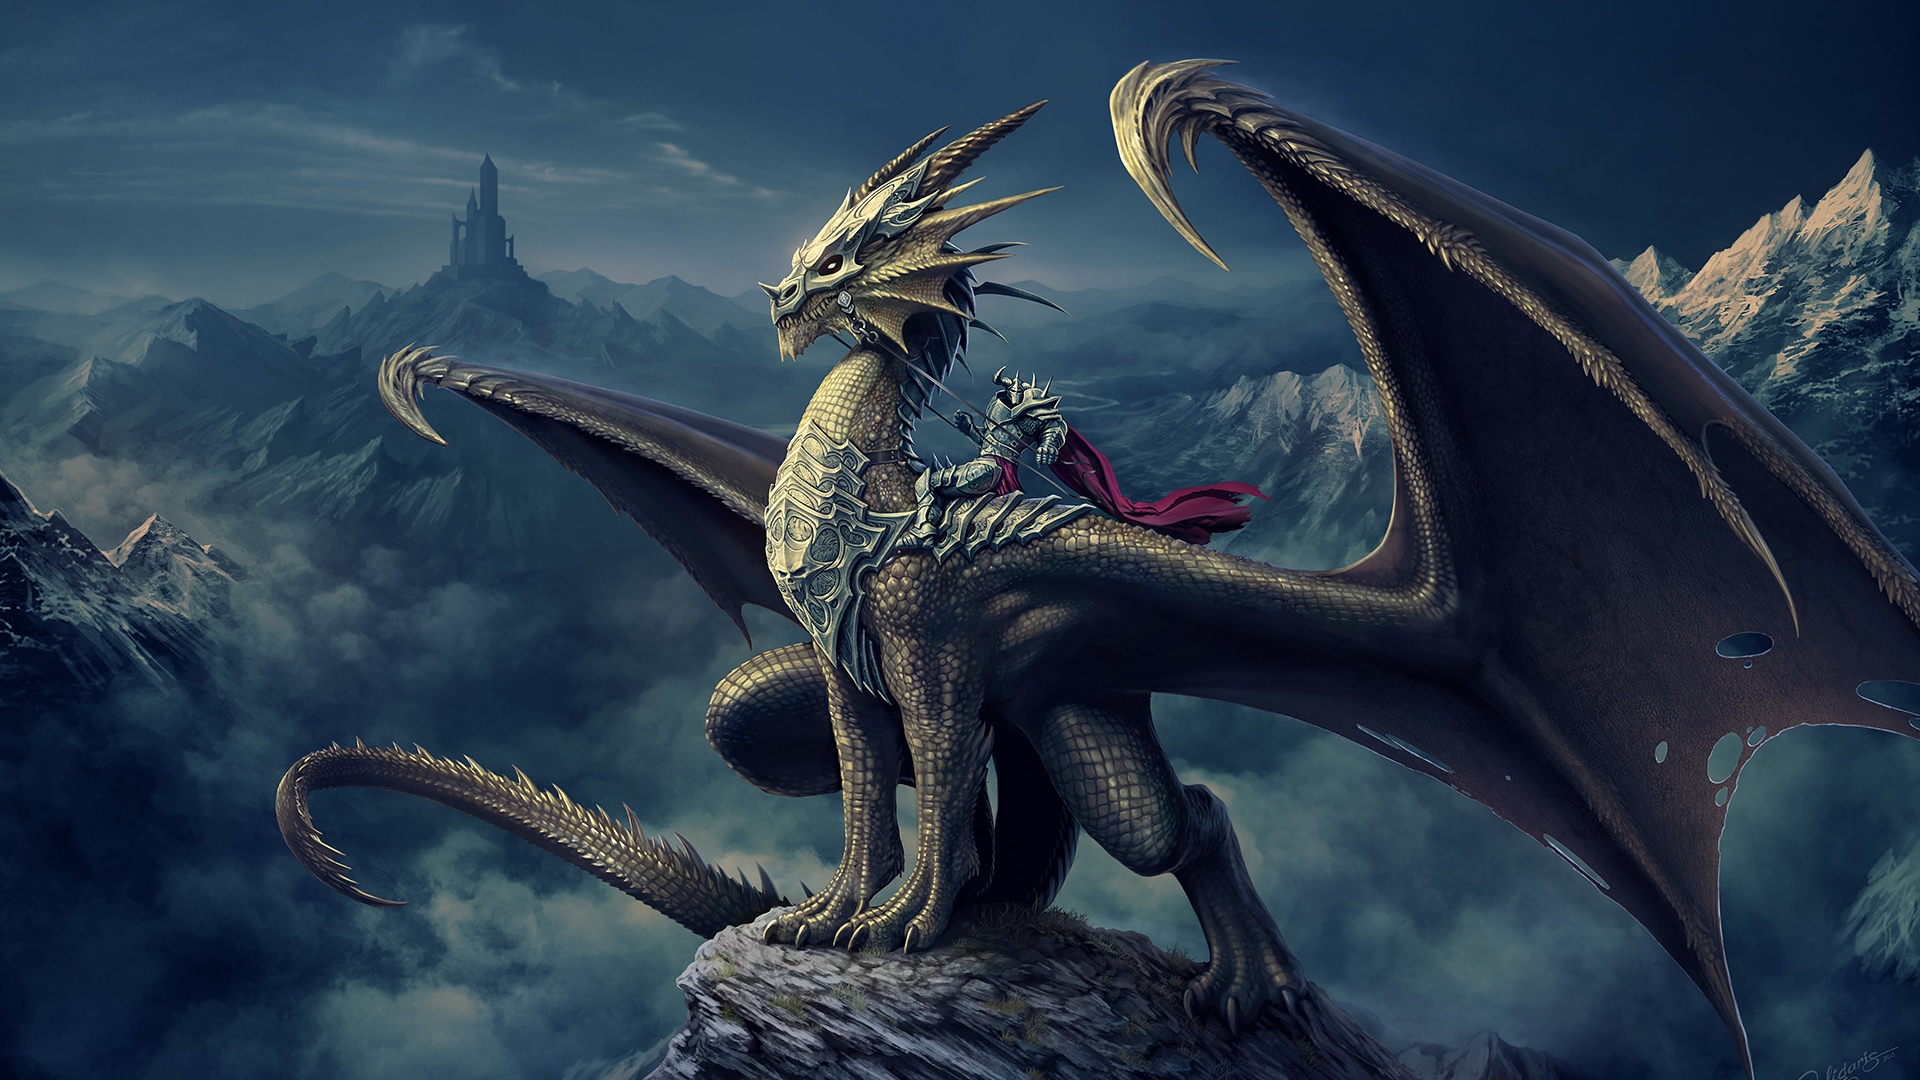 Wallpapers dragon knight riding on the desktop